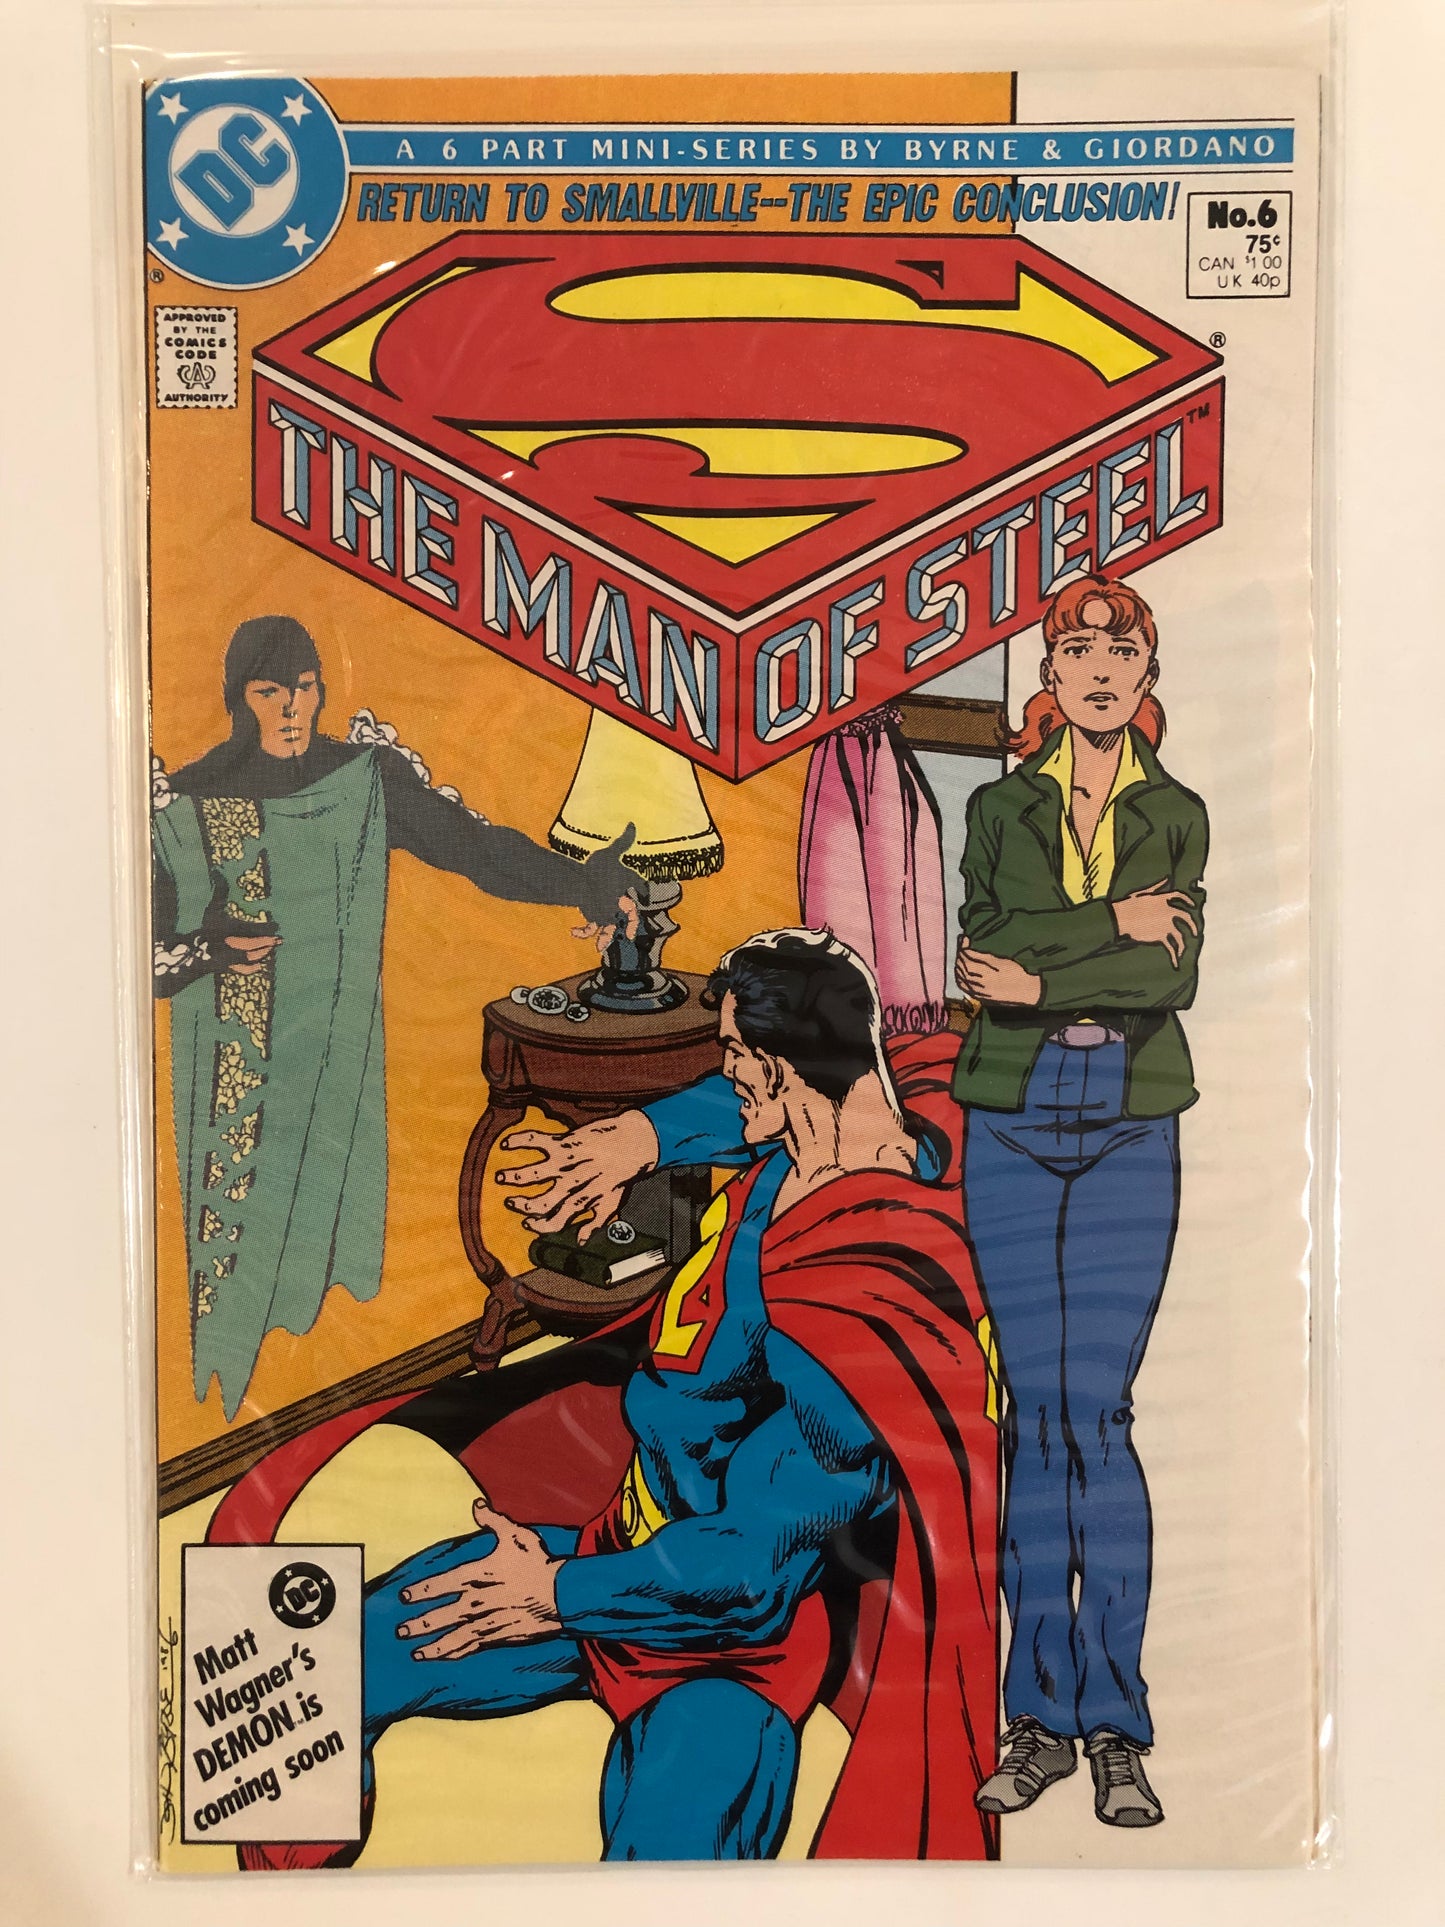 The Man of Steel #1-6